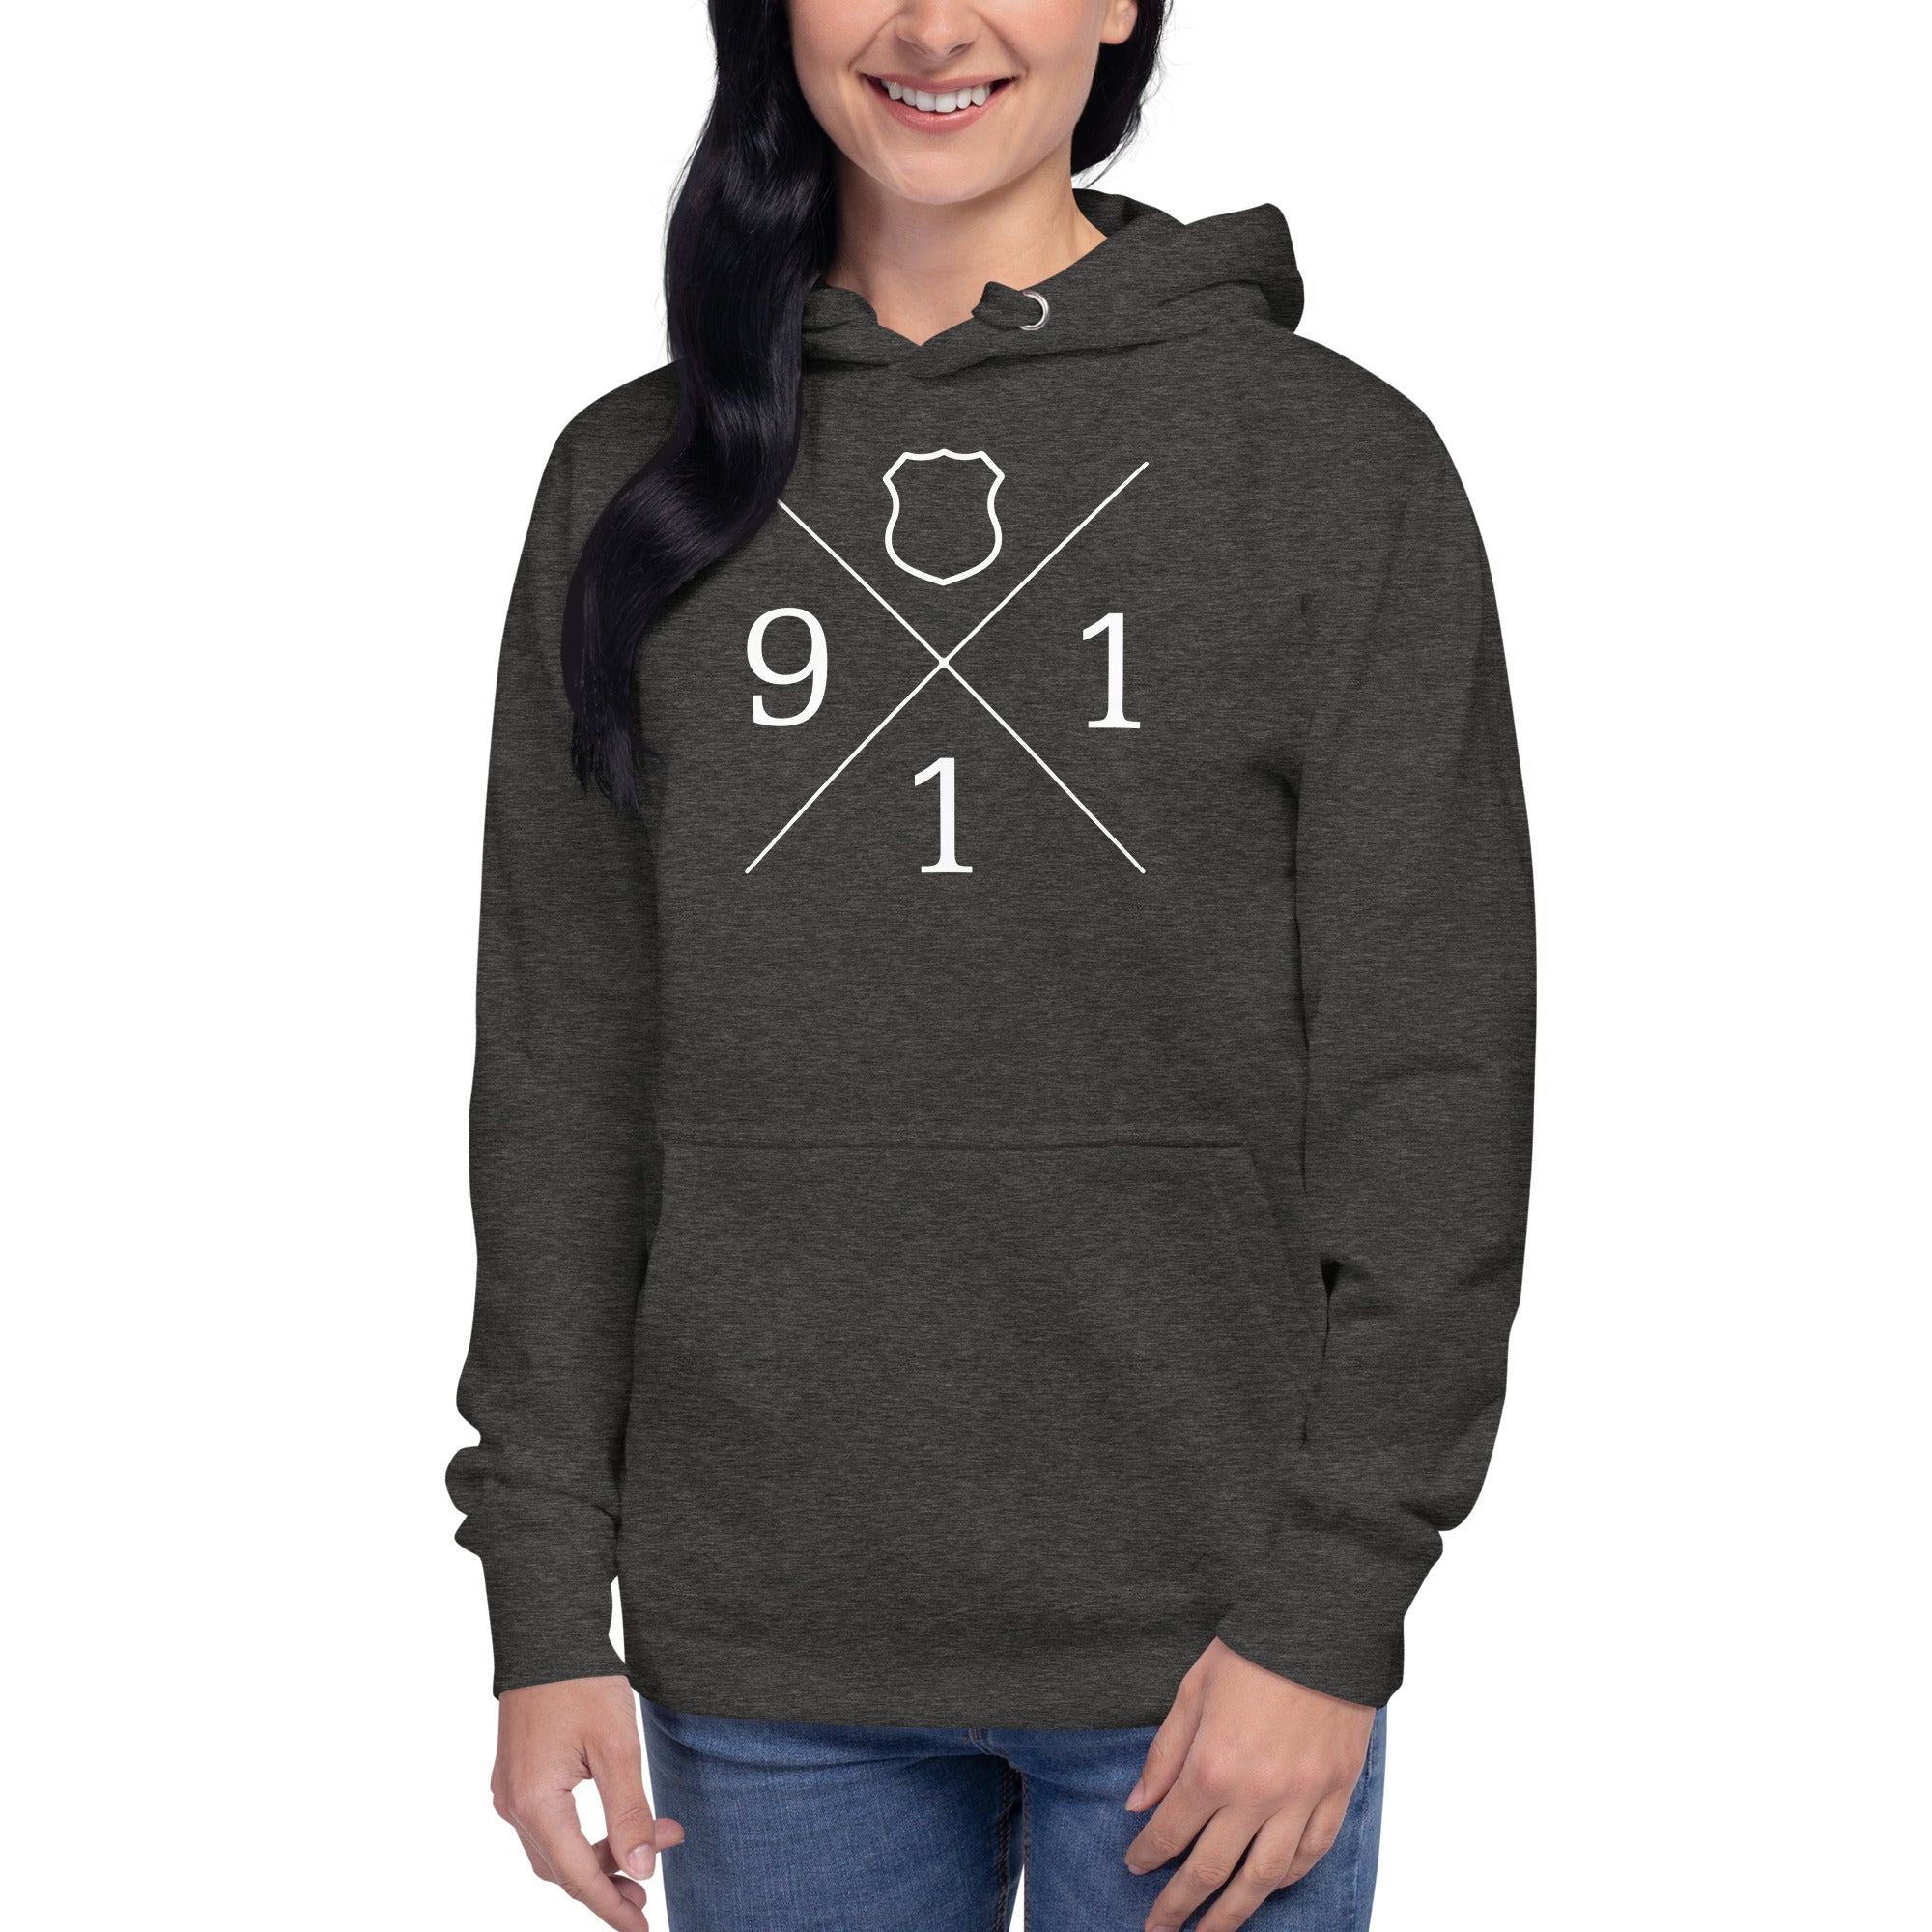 Police and Law Enforcement Badge 911 Unisex Hoodie – 911 Duty Gear 